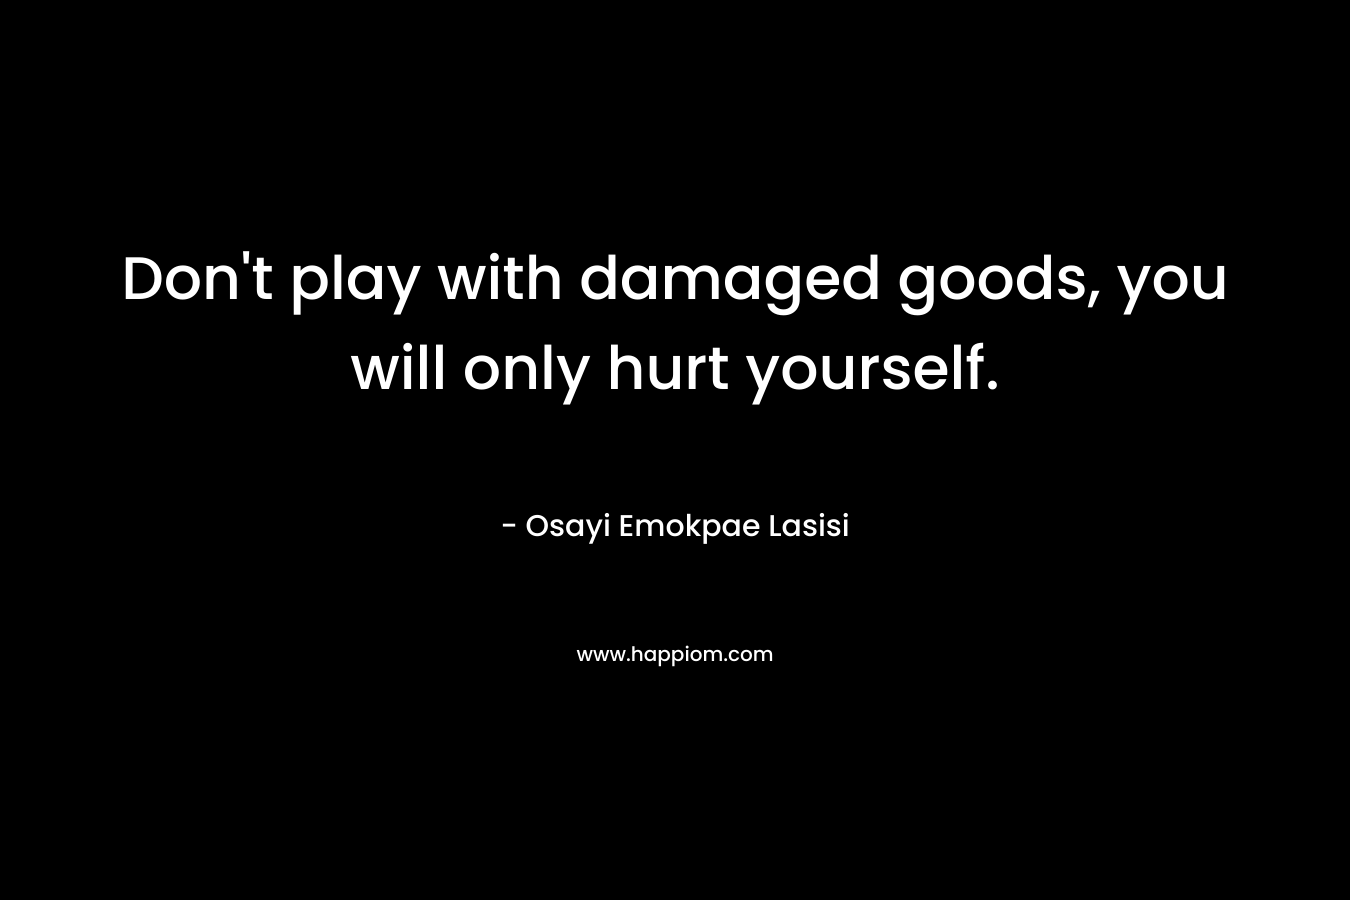 Don’t play with damaged goods, you will only hurt yourself. – Osayi Emokpae Lasisi